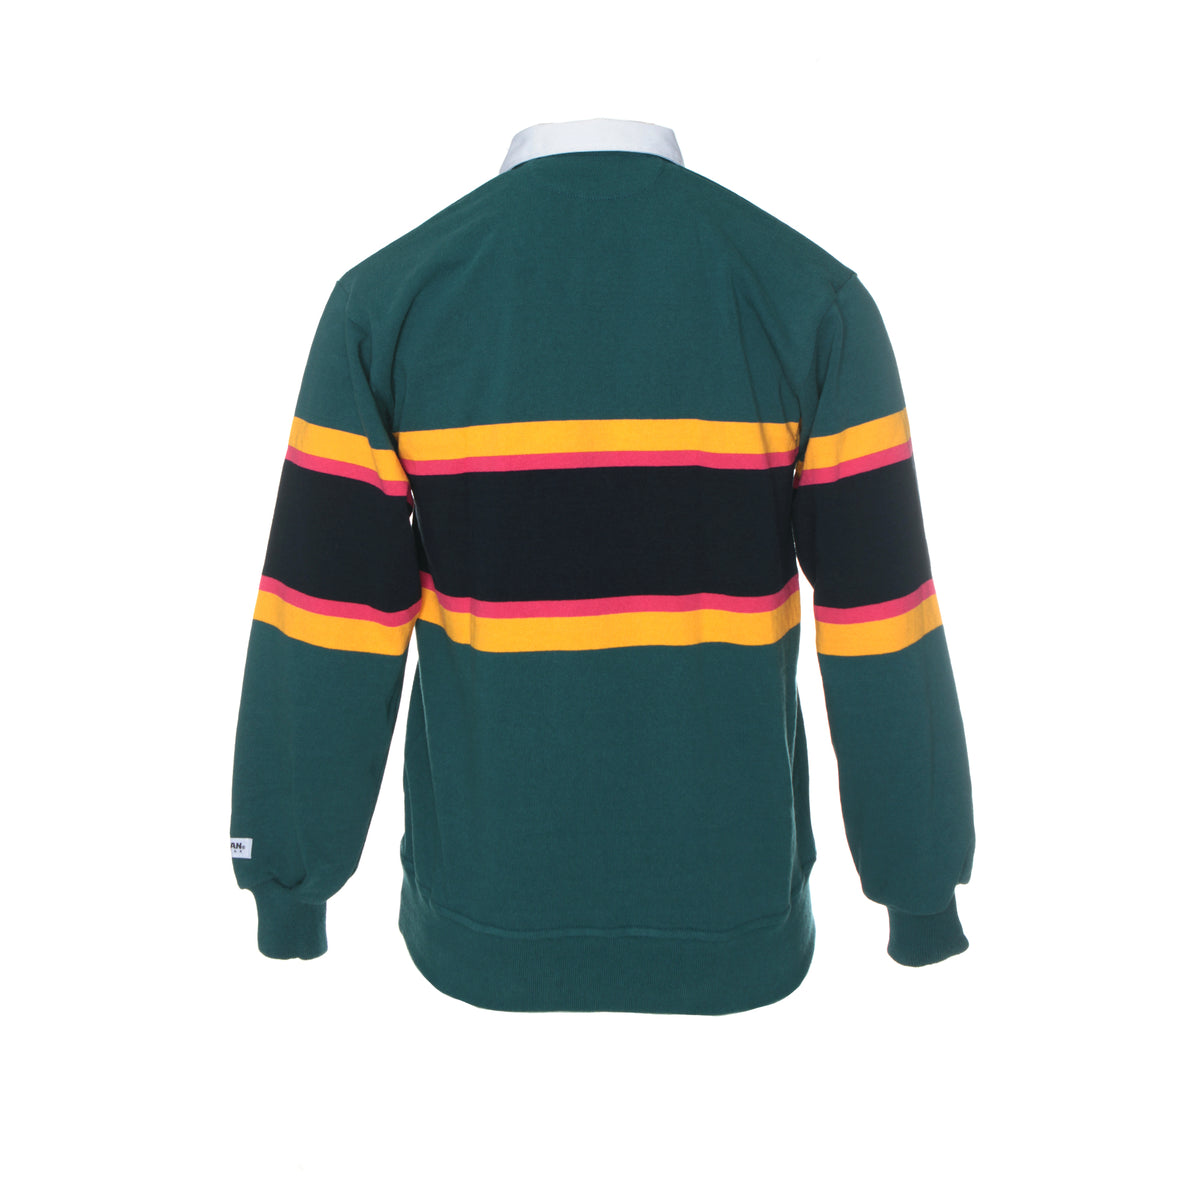 Raised by Wolves Barbarian Men's Rugby Sweater Teal